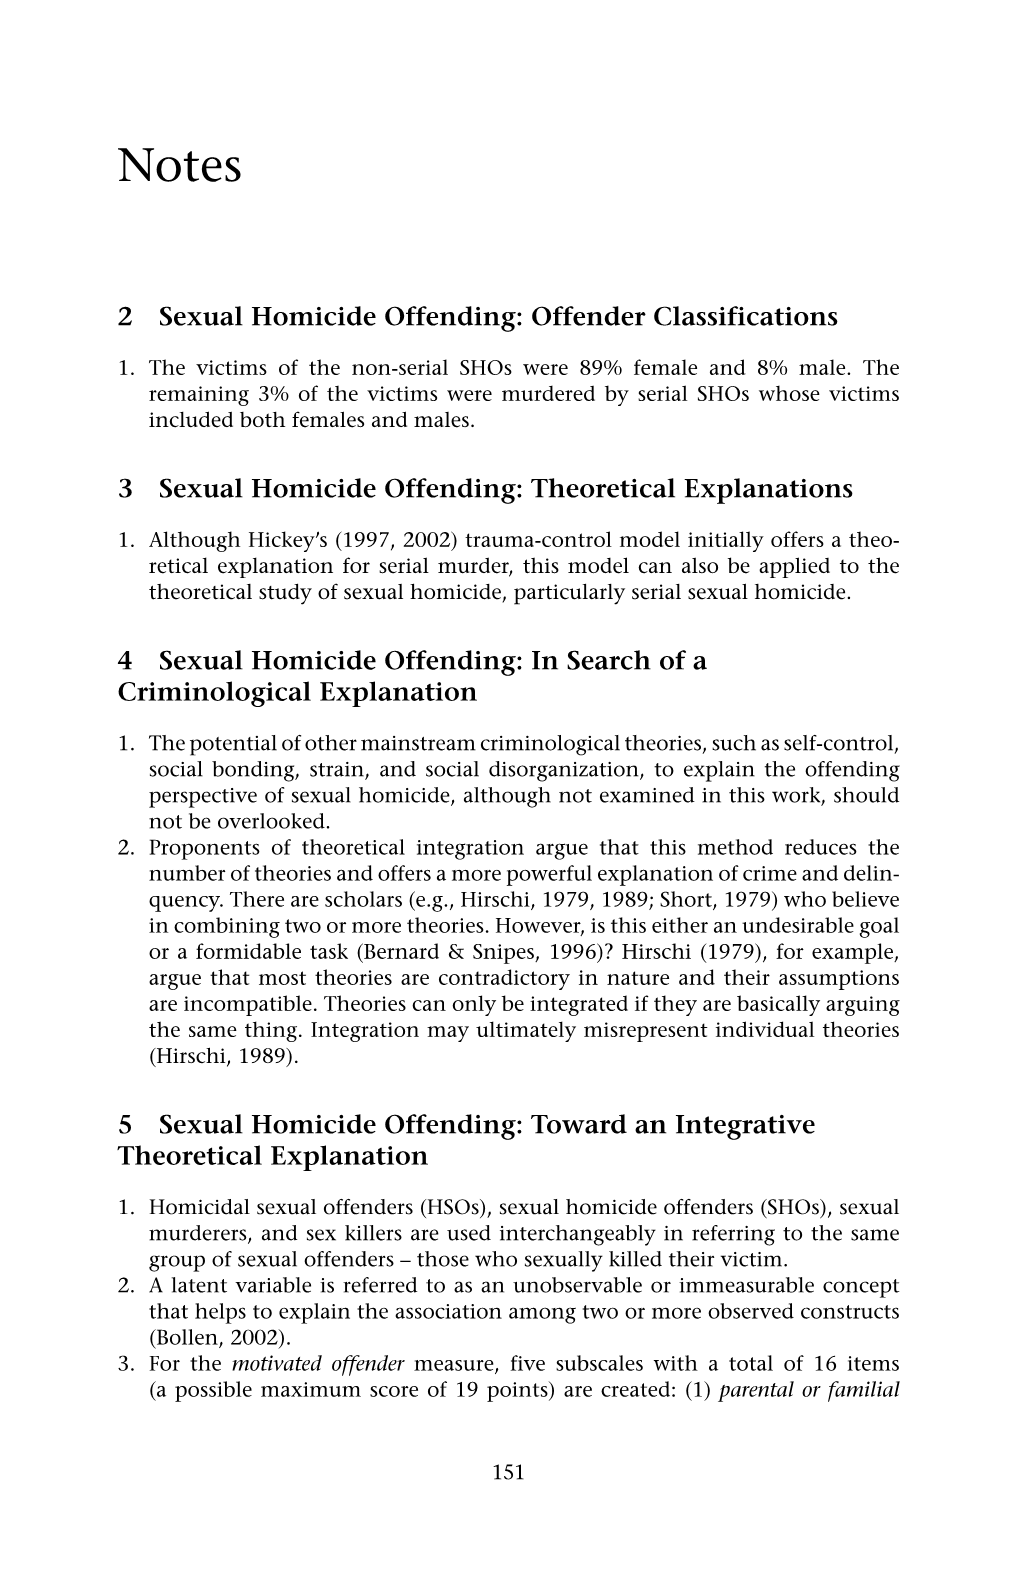 Theoretical Explanations 4 Sexual Homicide O